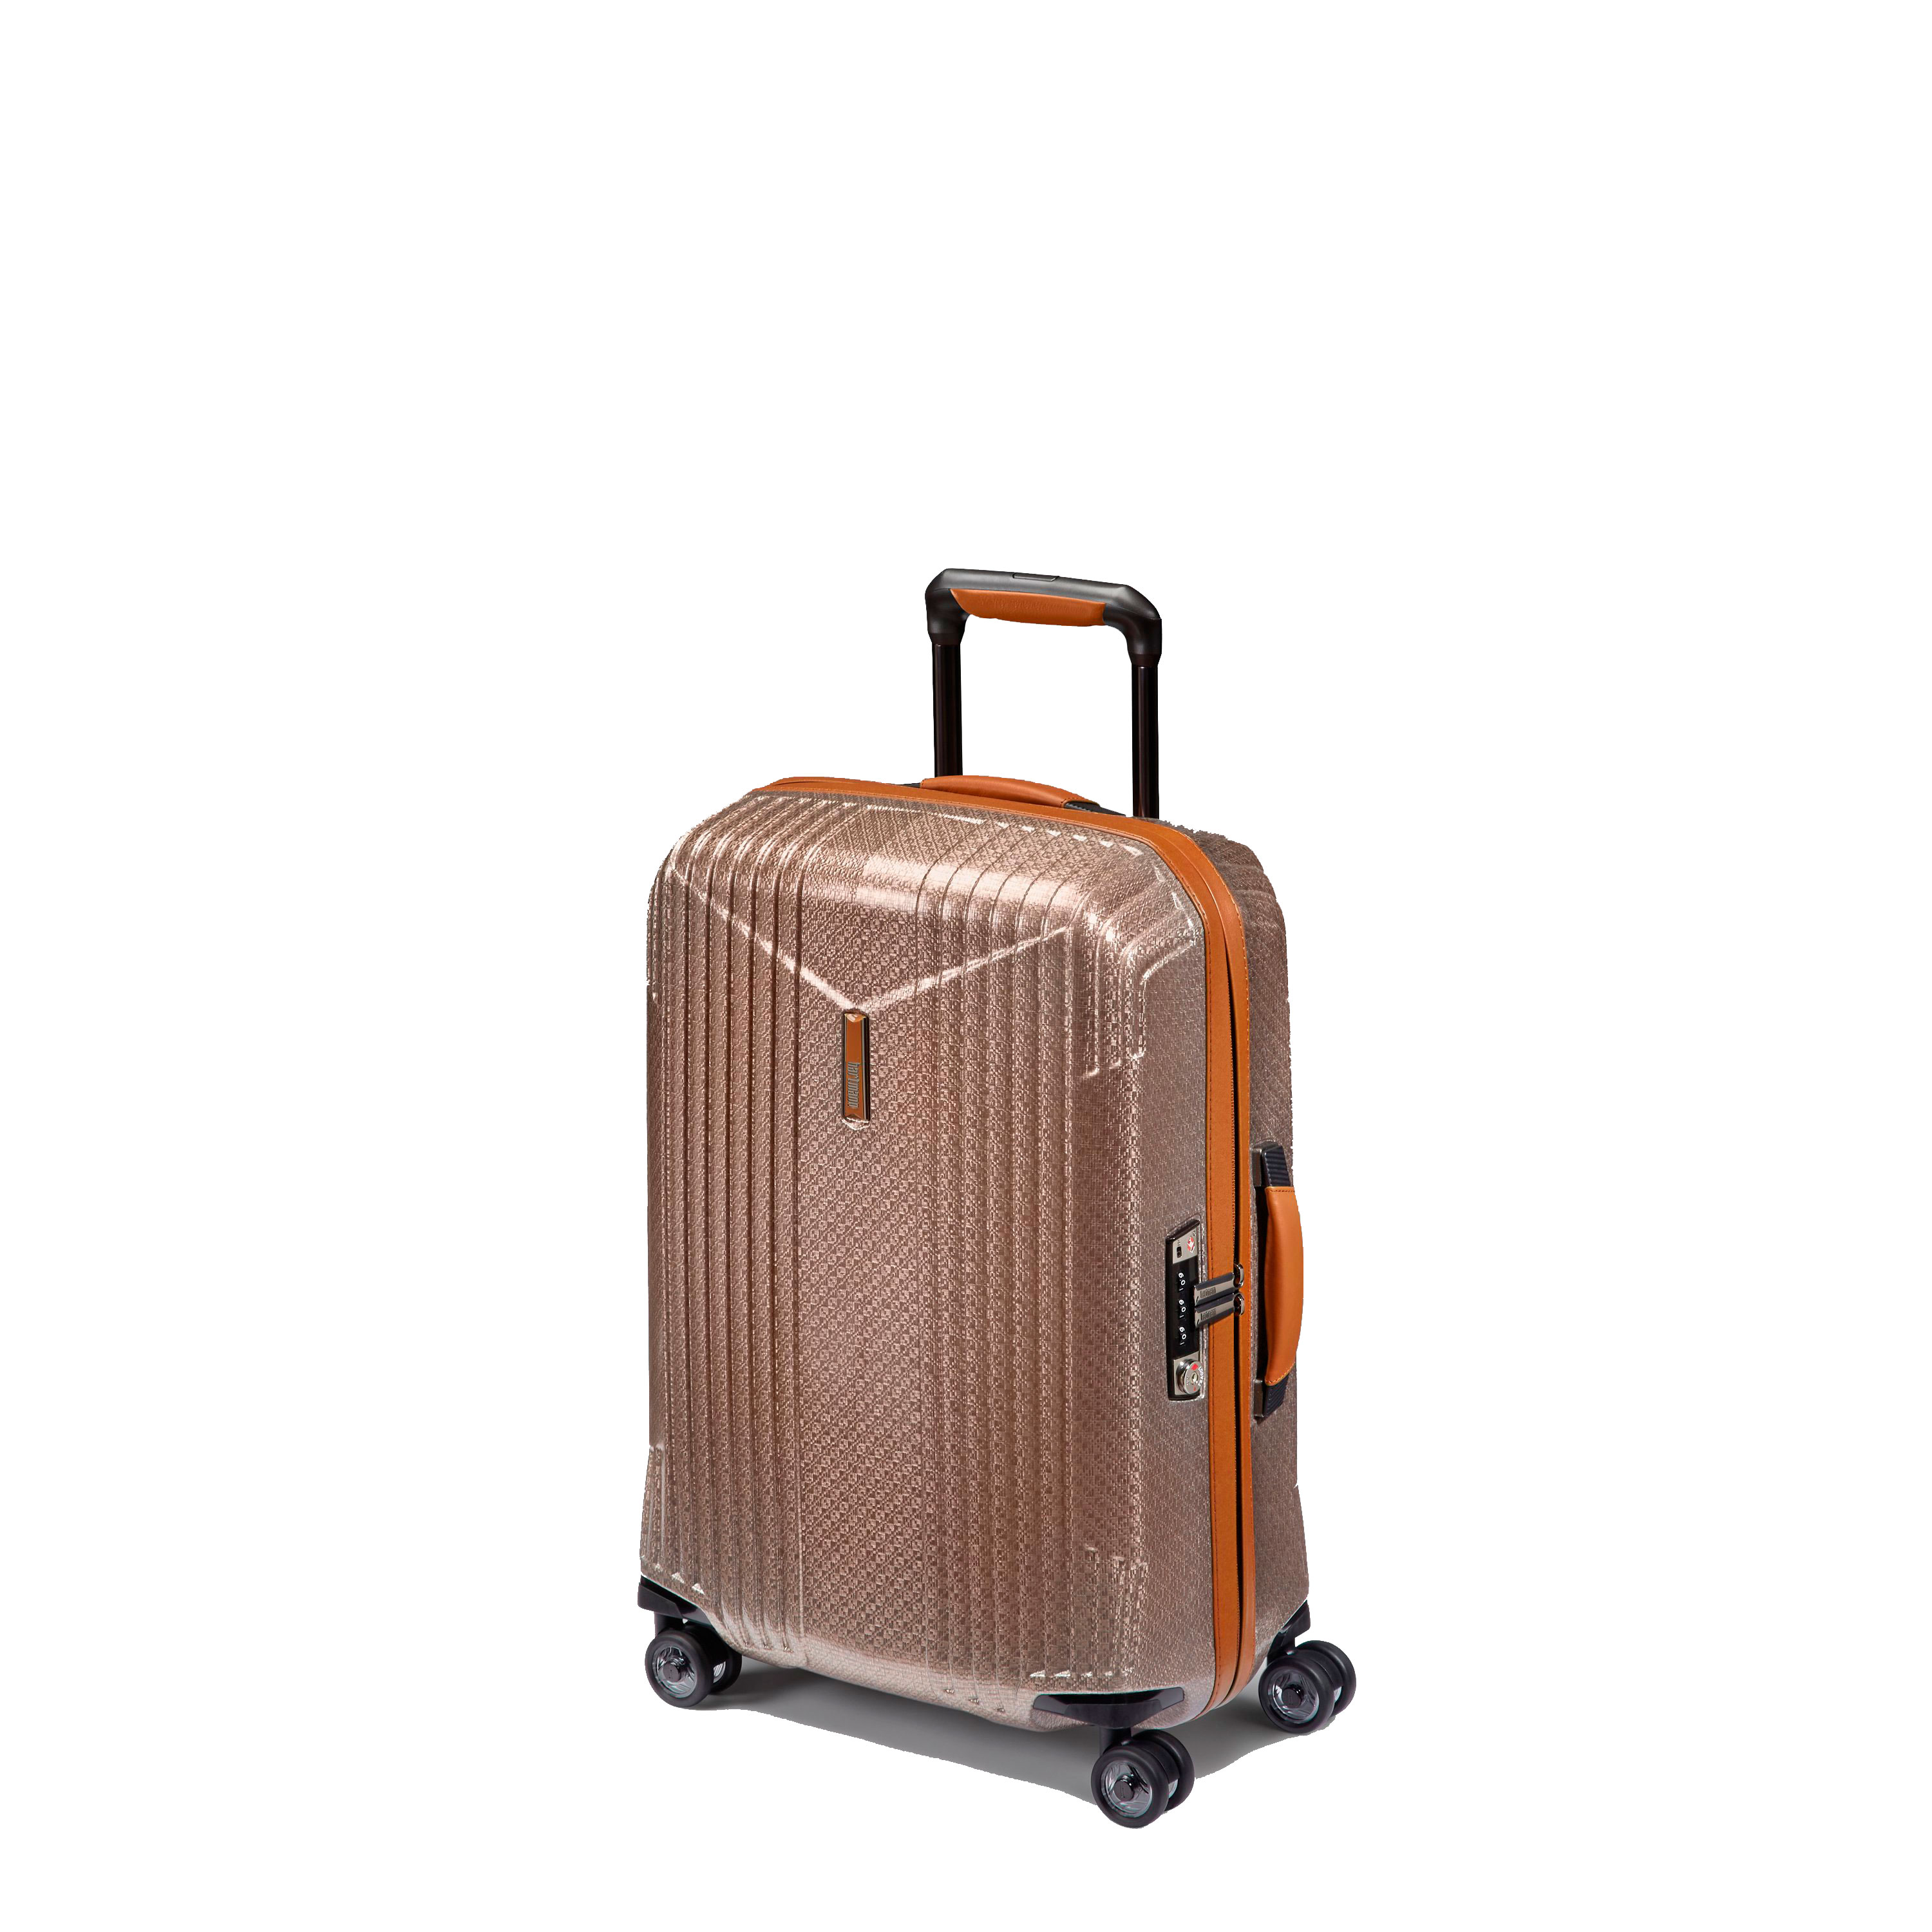 hartmann luggage outlet stores